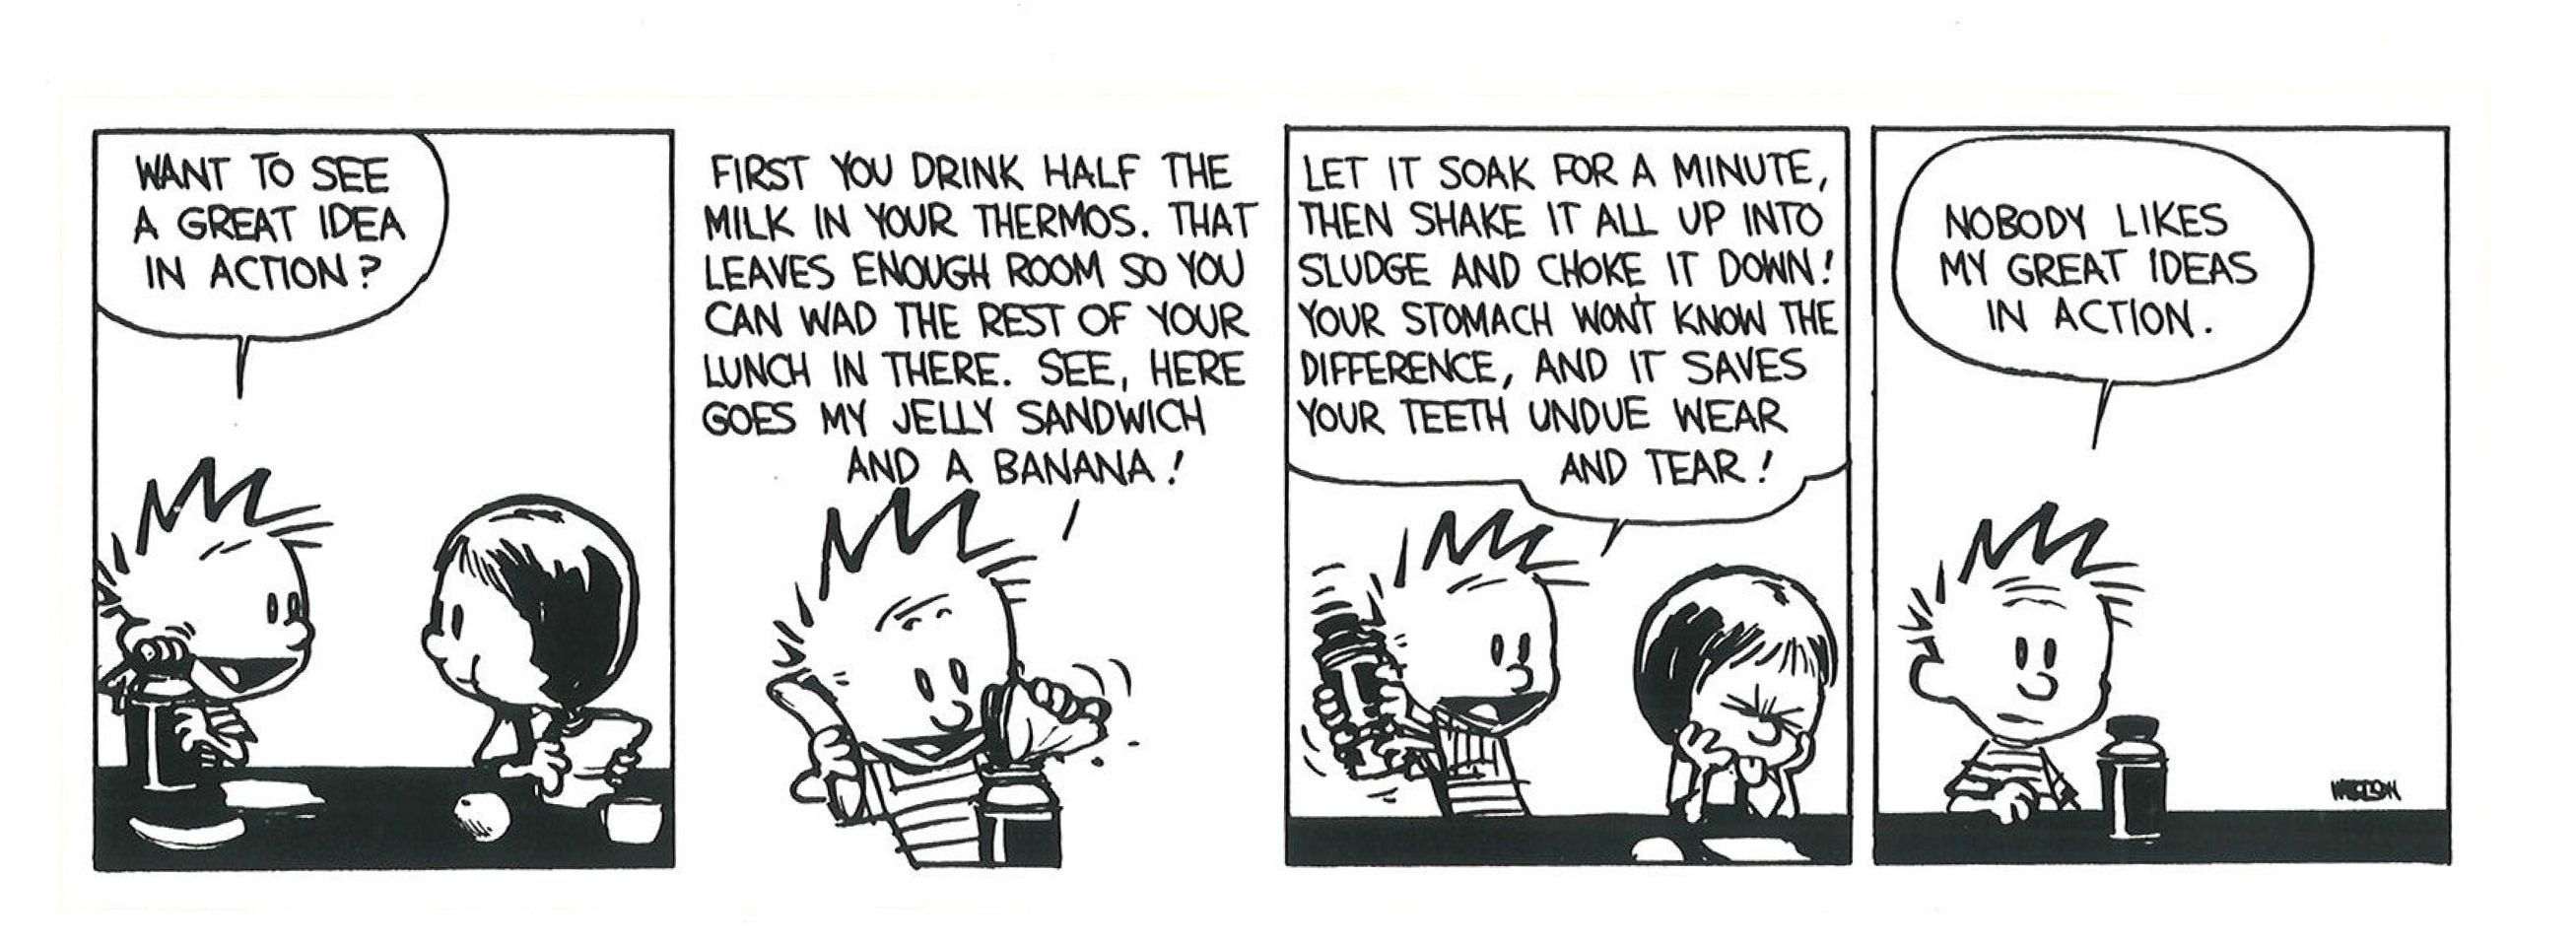 Calvin and Hobbes strip of Calvin grossing out Susie Derkins at lunch by stuffing his food into his chocolate milk.